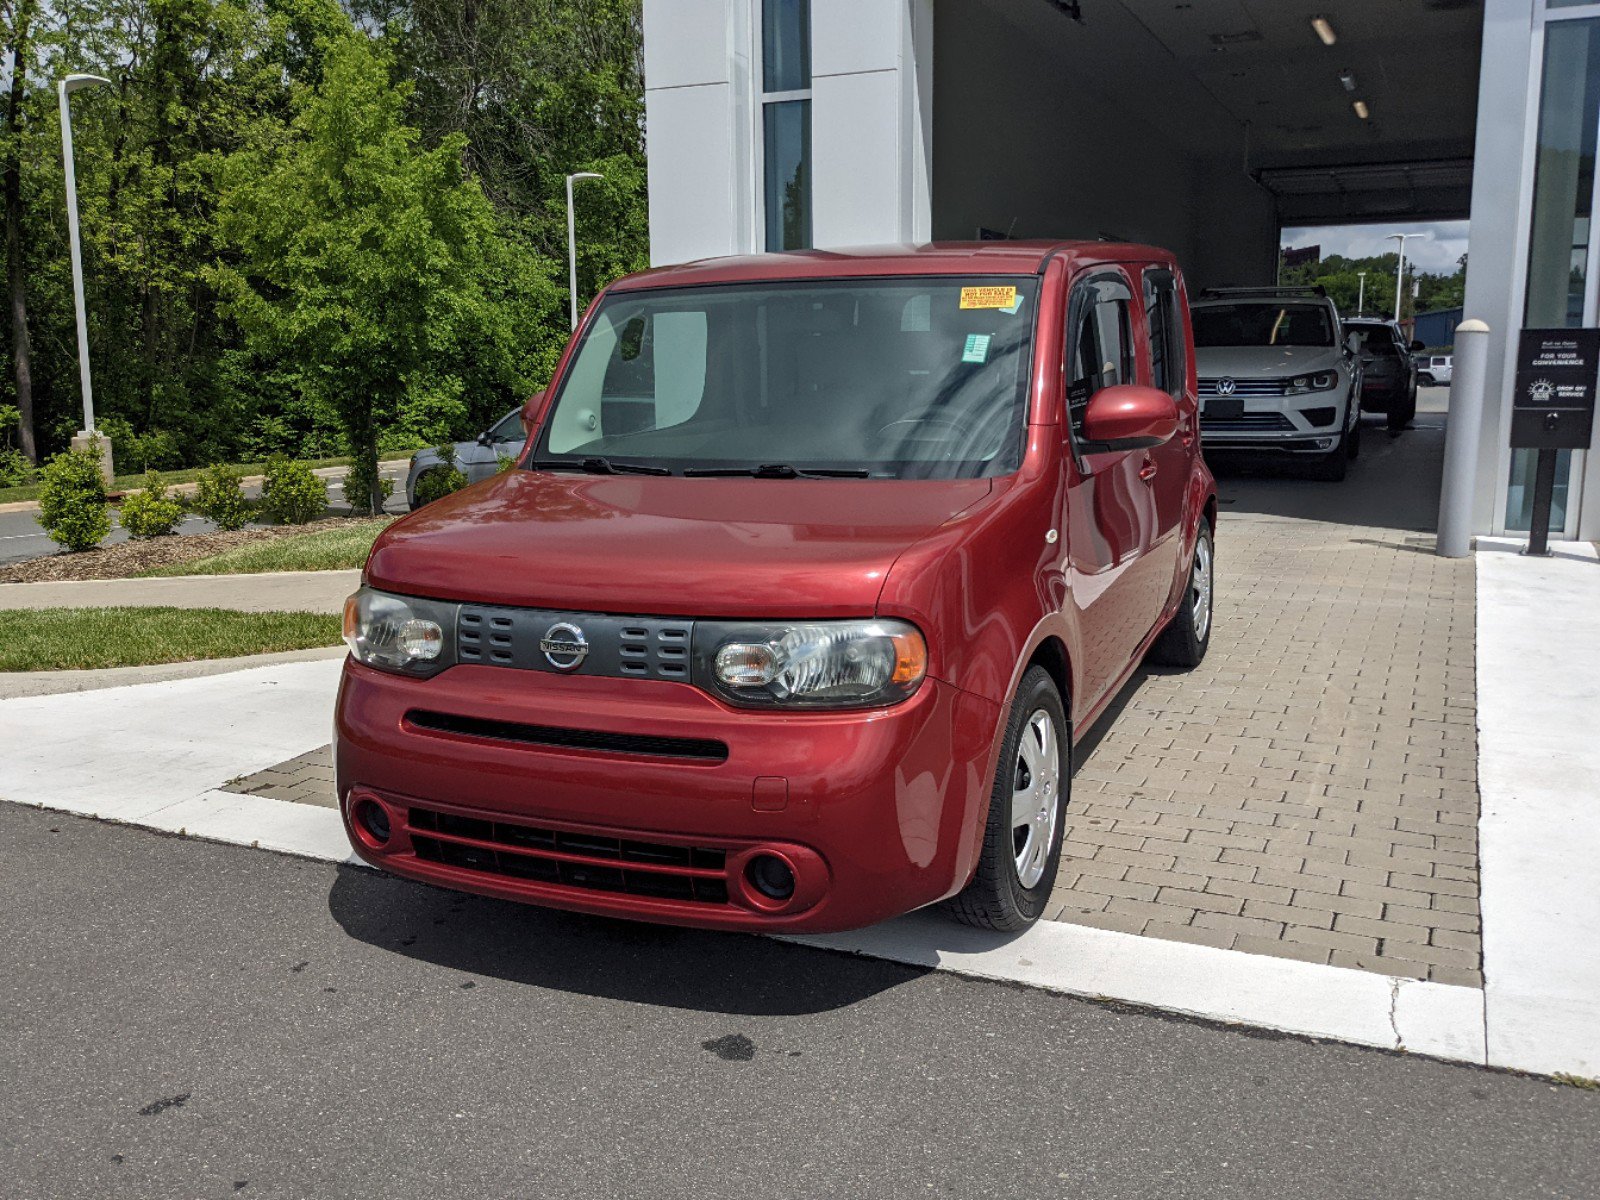 Pre-Owned 2012 Nissan cube 1.8 S Station Wagon in Mount Hope #2078B |  Crossroads Chevrolet